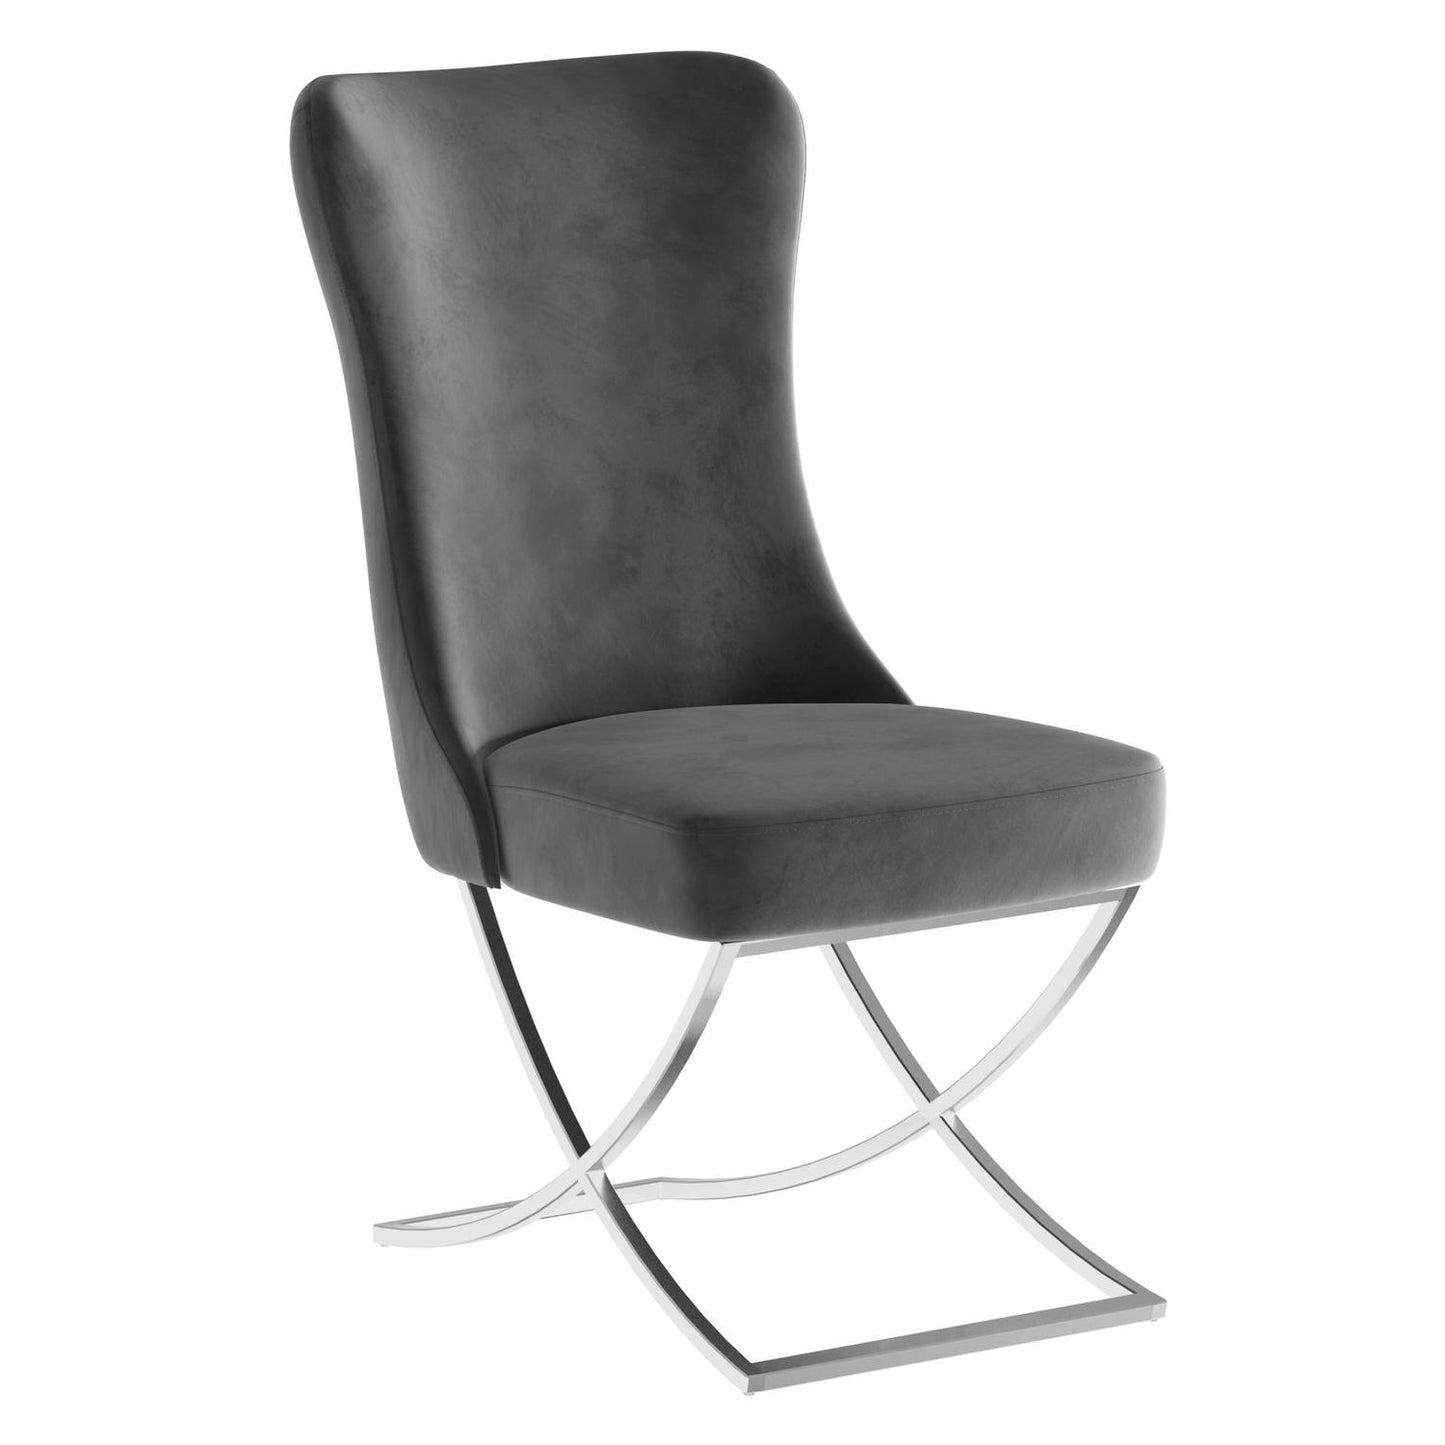 Sultan Collection Wing Back, Modern design, upholstered dining chair in Charcoal Gray with Silver Metal legs in white background the front view.